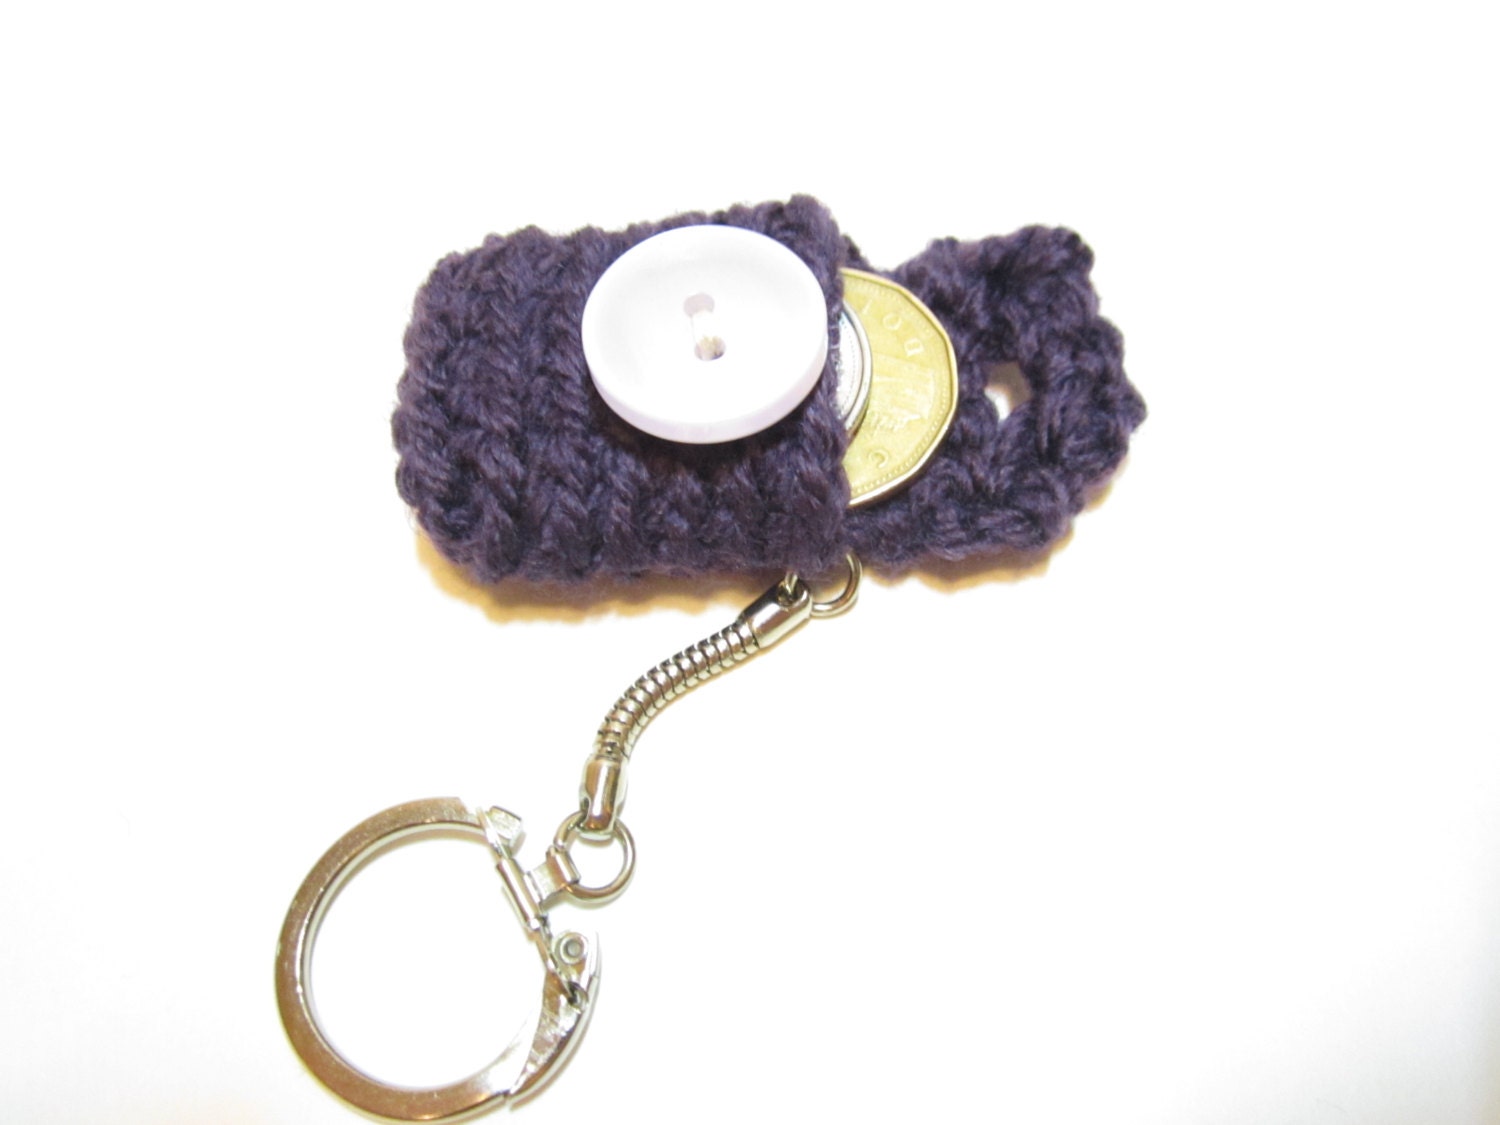 Crochet Coin Purse Keychain in Purple with Button Coin